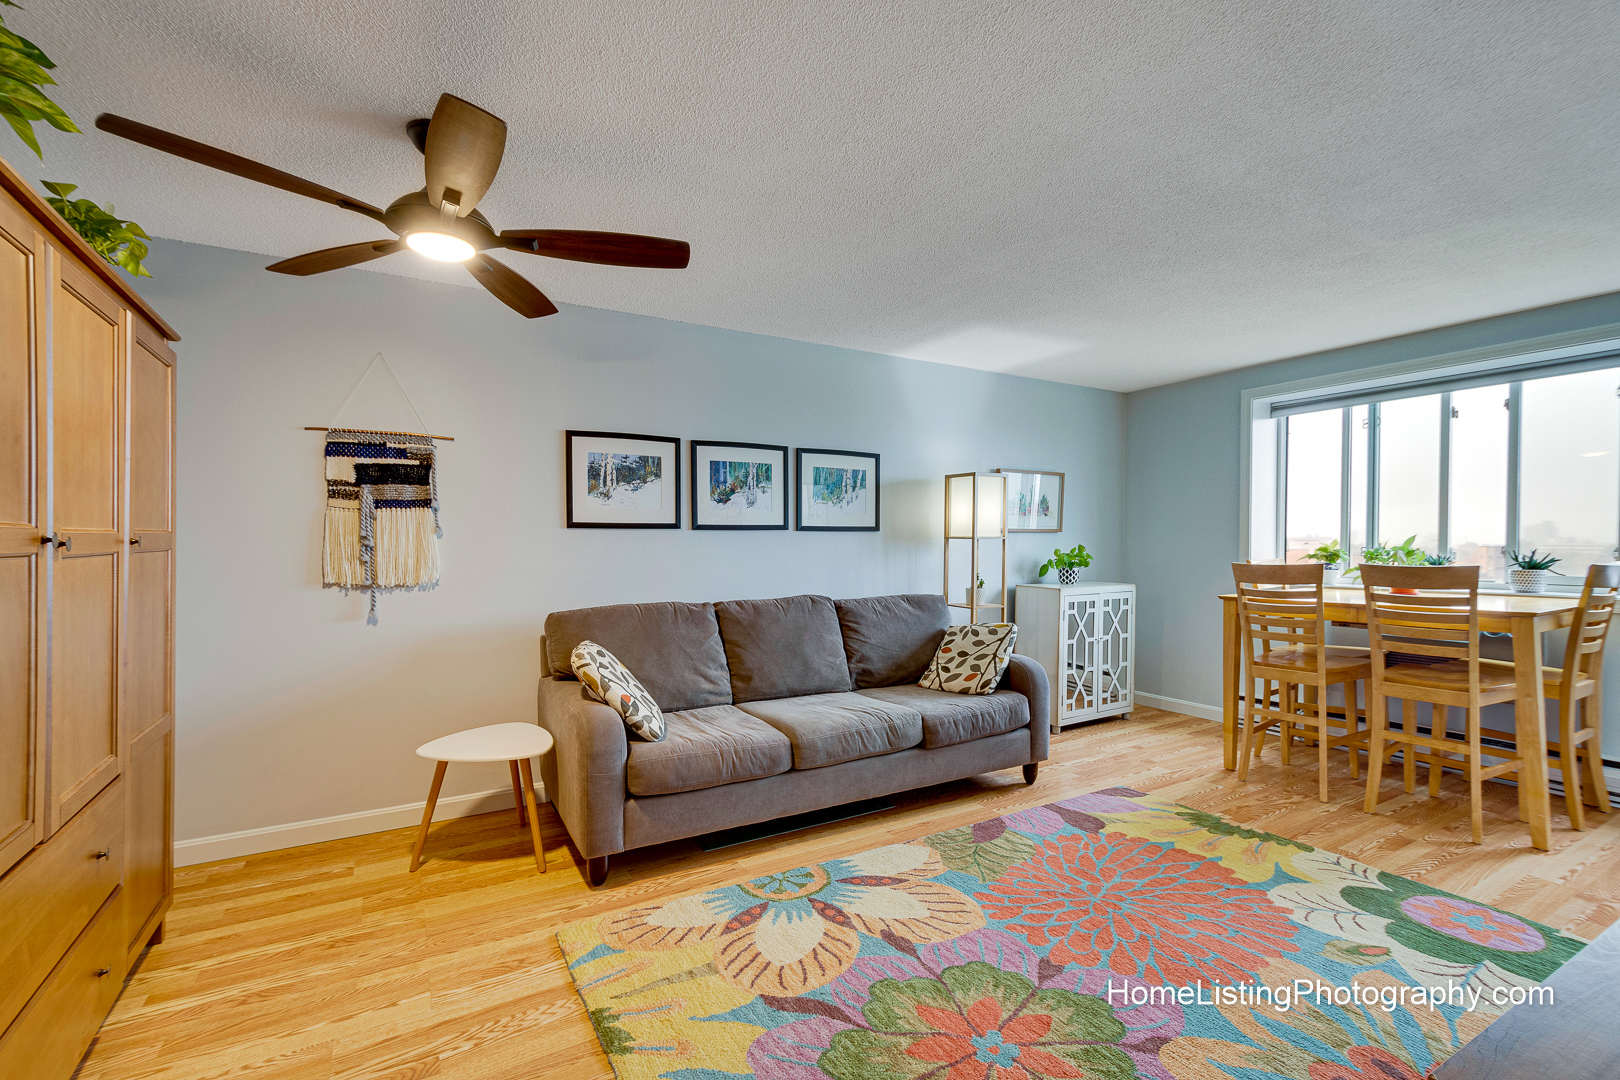 Thomas Adach - Somerbille MA professional real estate photographer - 508-655-2225 Home Listing Photography